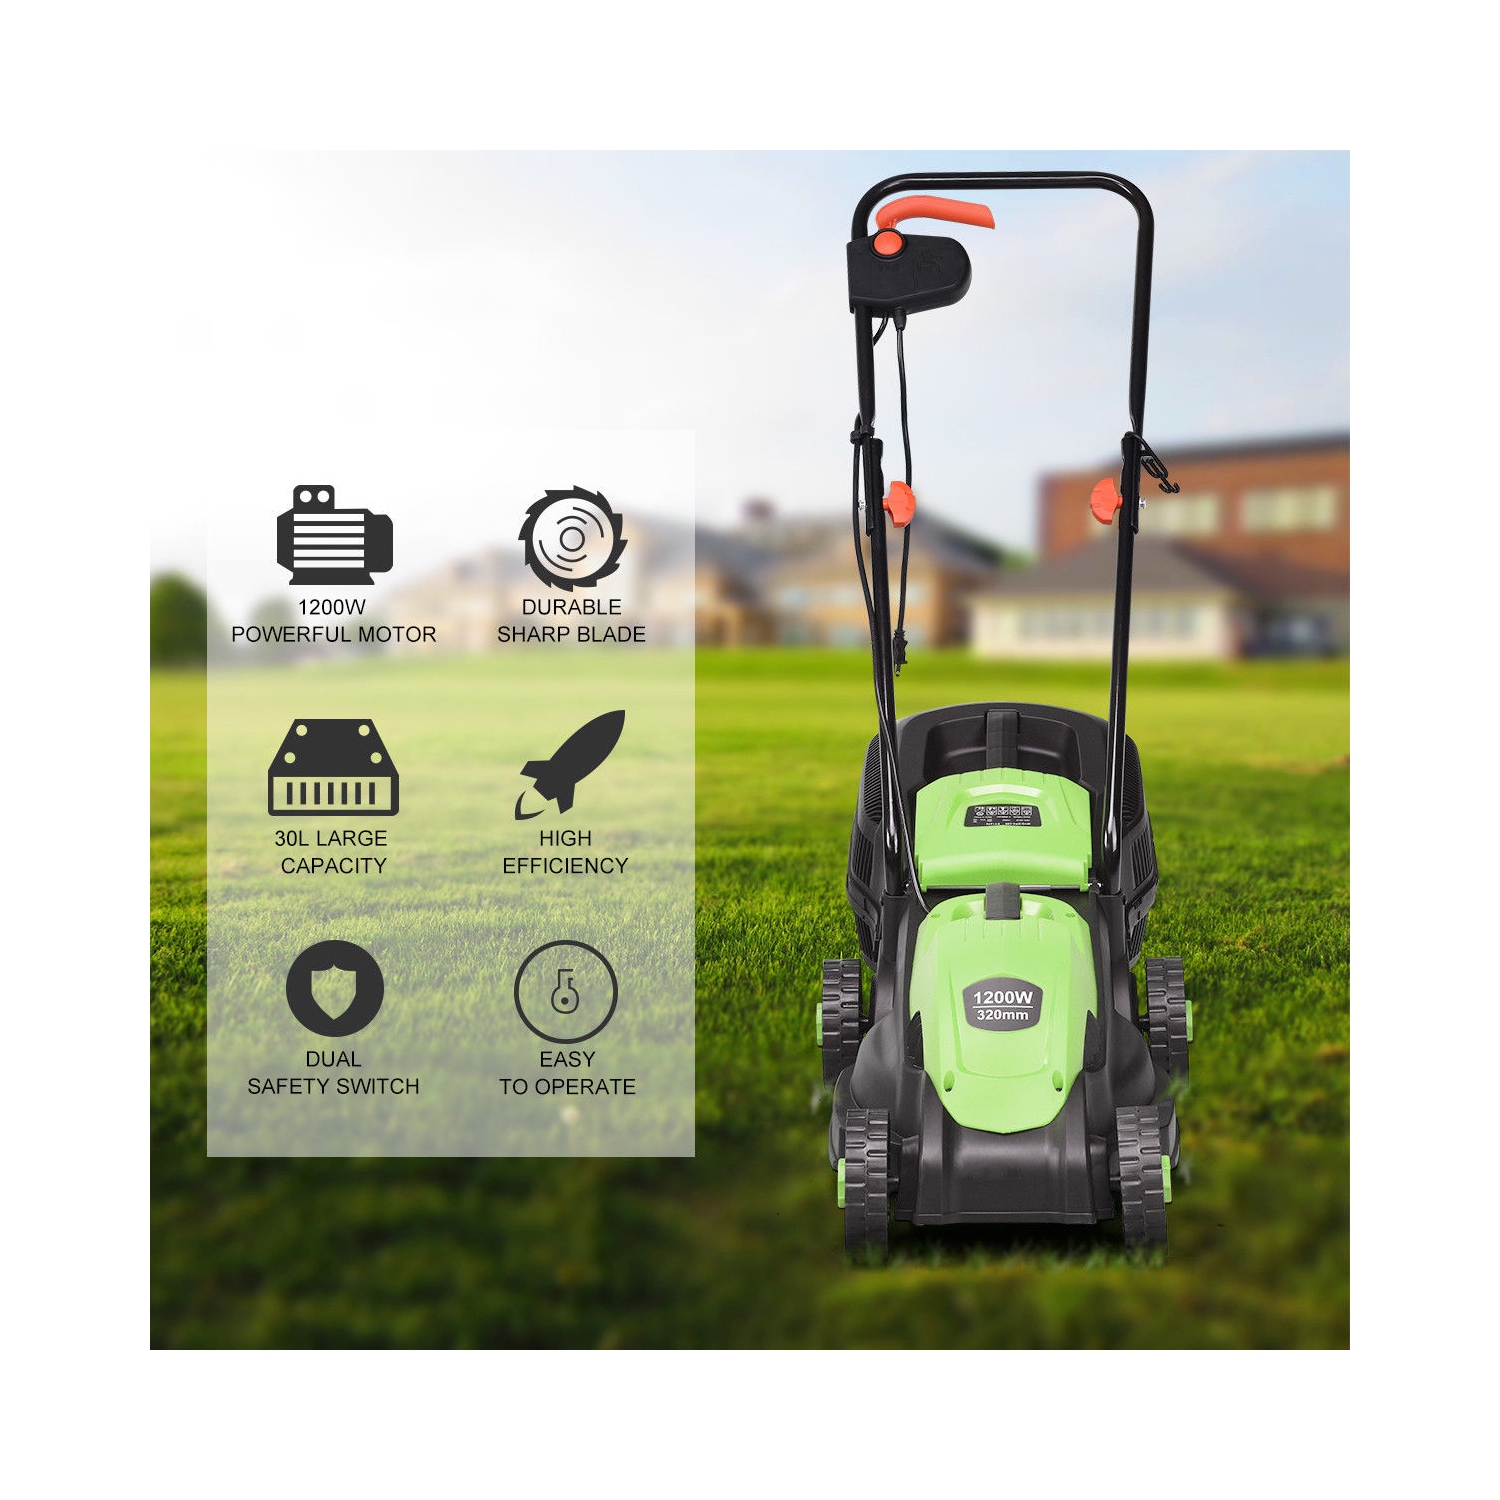  Happygrill Lawn Mower 14-Inch 12 Amp Electric Lawn Mower,  Handle Push Corded Lawn Mower with Grass Bag : Patio, Lawn & Garden